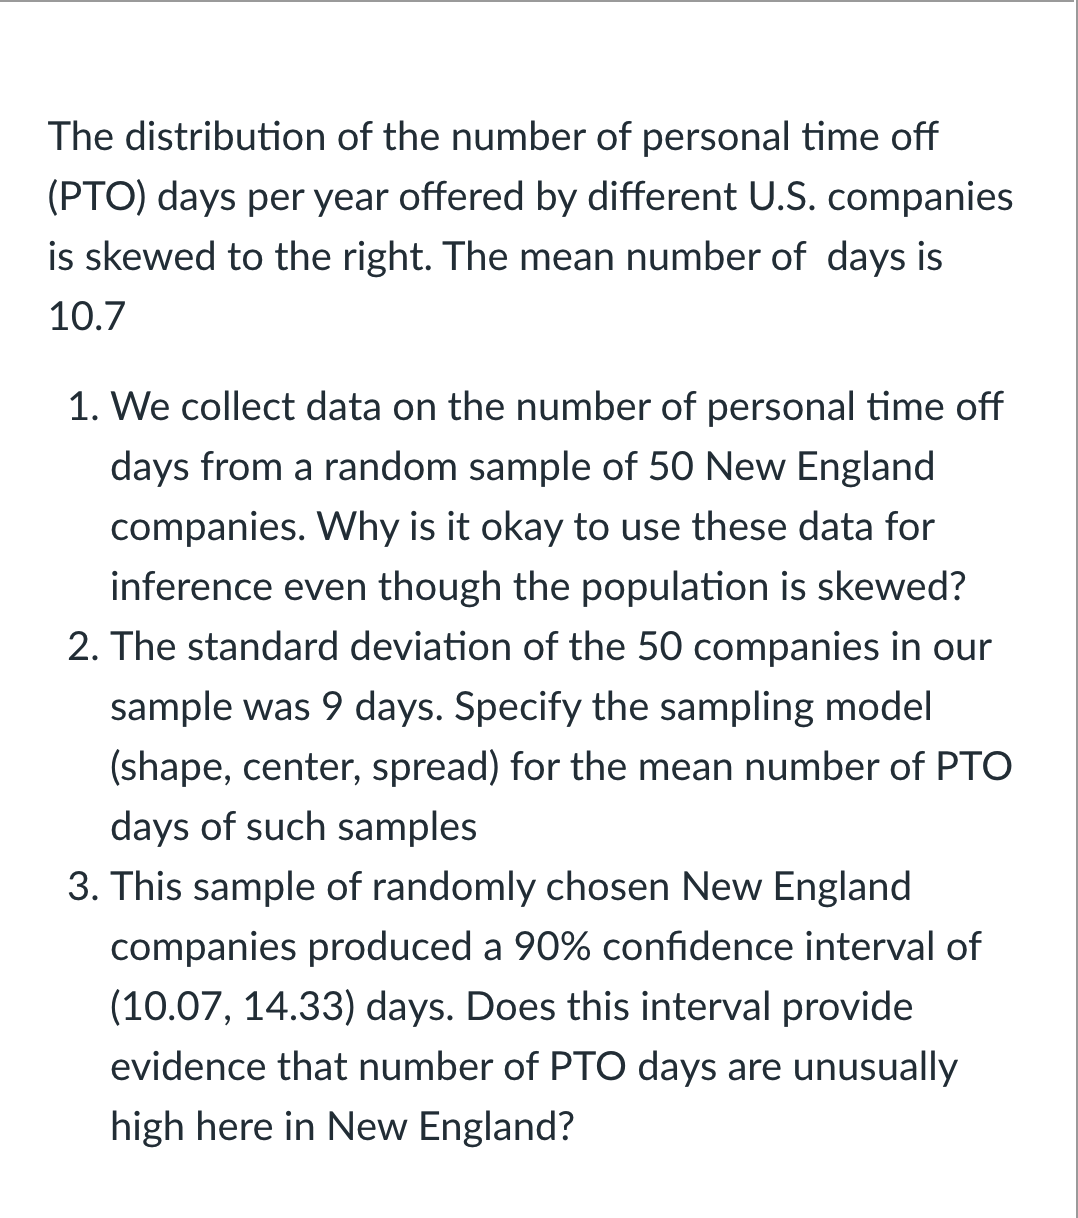 The distribution of the number of personal time off
(PTO) days per year offered by different U.S. companies
is skewed to the right. The mean number of days is
10.7
1. We collect data on the number of personal time off
days from a random sample of 50 New England
companies. Why is it okay to use these data for
inference even though the population is skewed?
2. The standard deviation of the 50 companies in our
sample was 9 days. Specify the sampling model
(shape, center, spread) for the mean number of PTO
days of such samples
3. This sample of randomly chosen New England
companies produced a 90% confidence interval of
(10.07, 14.33) days. Does this interval provide
evidence that number of PTO days are unusually
high here in New England?
